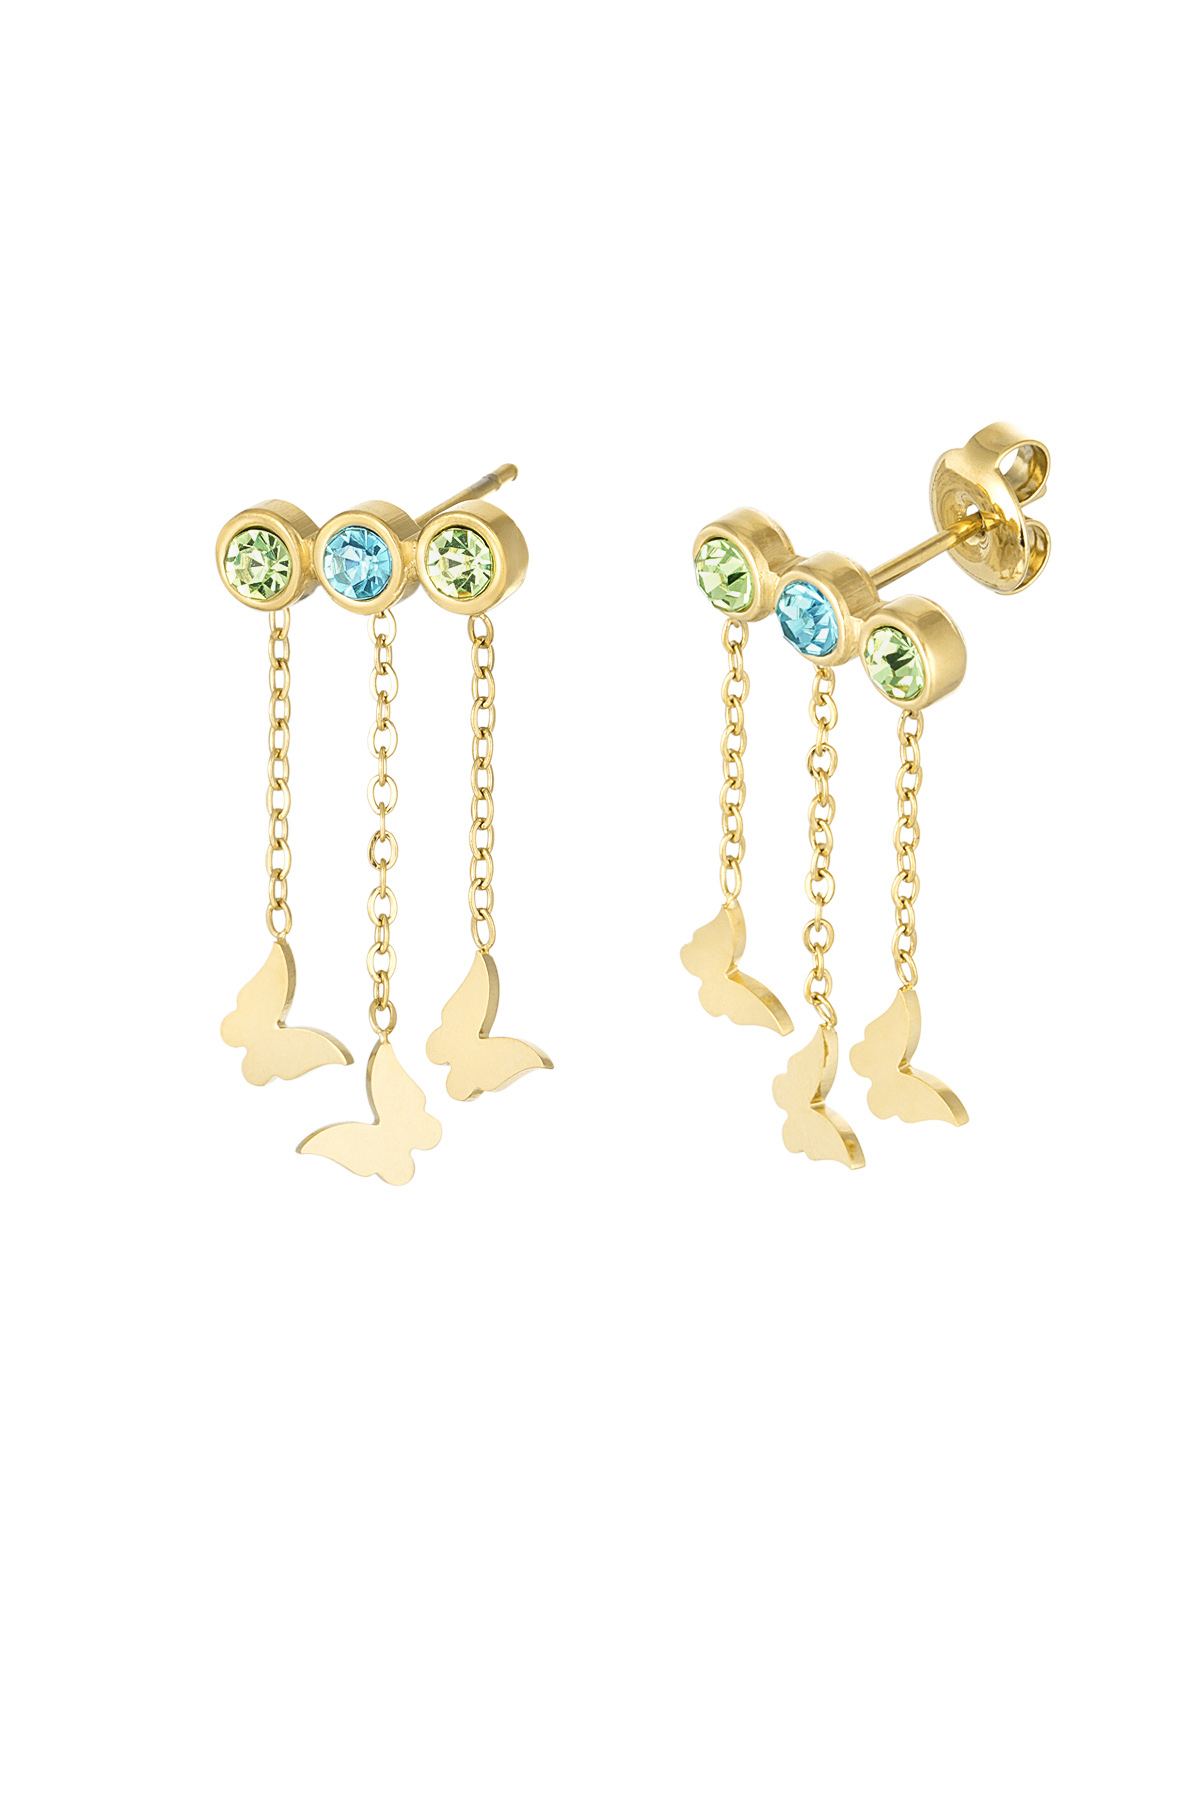 Earrings with butterflies & stones - gold/blue/green h5 